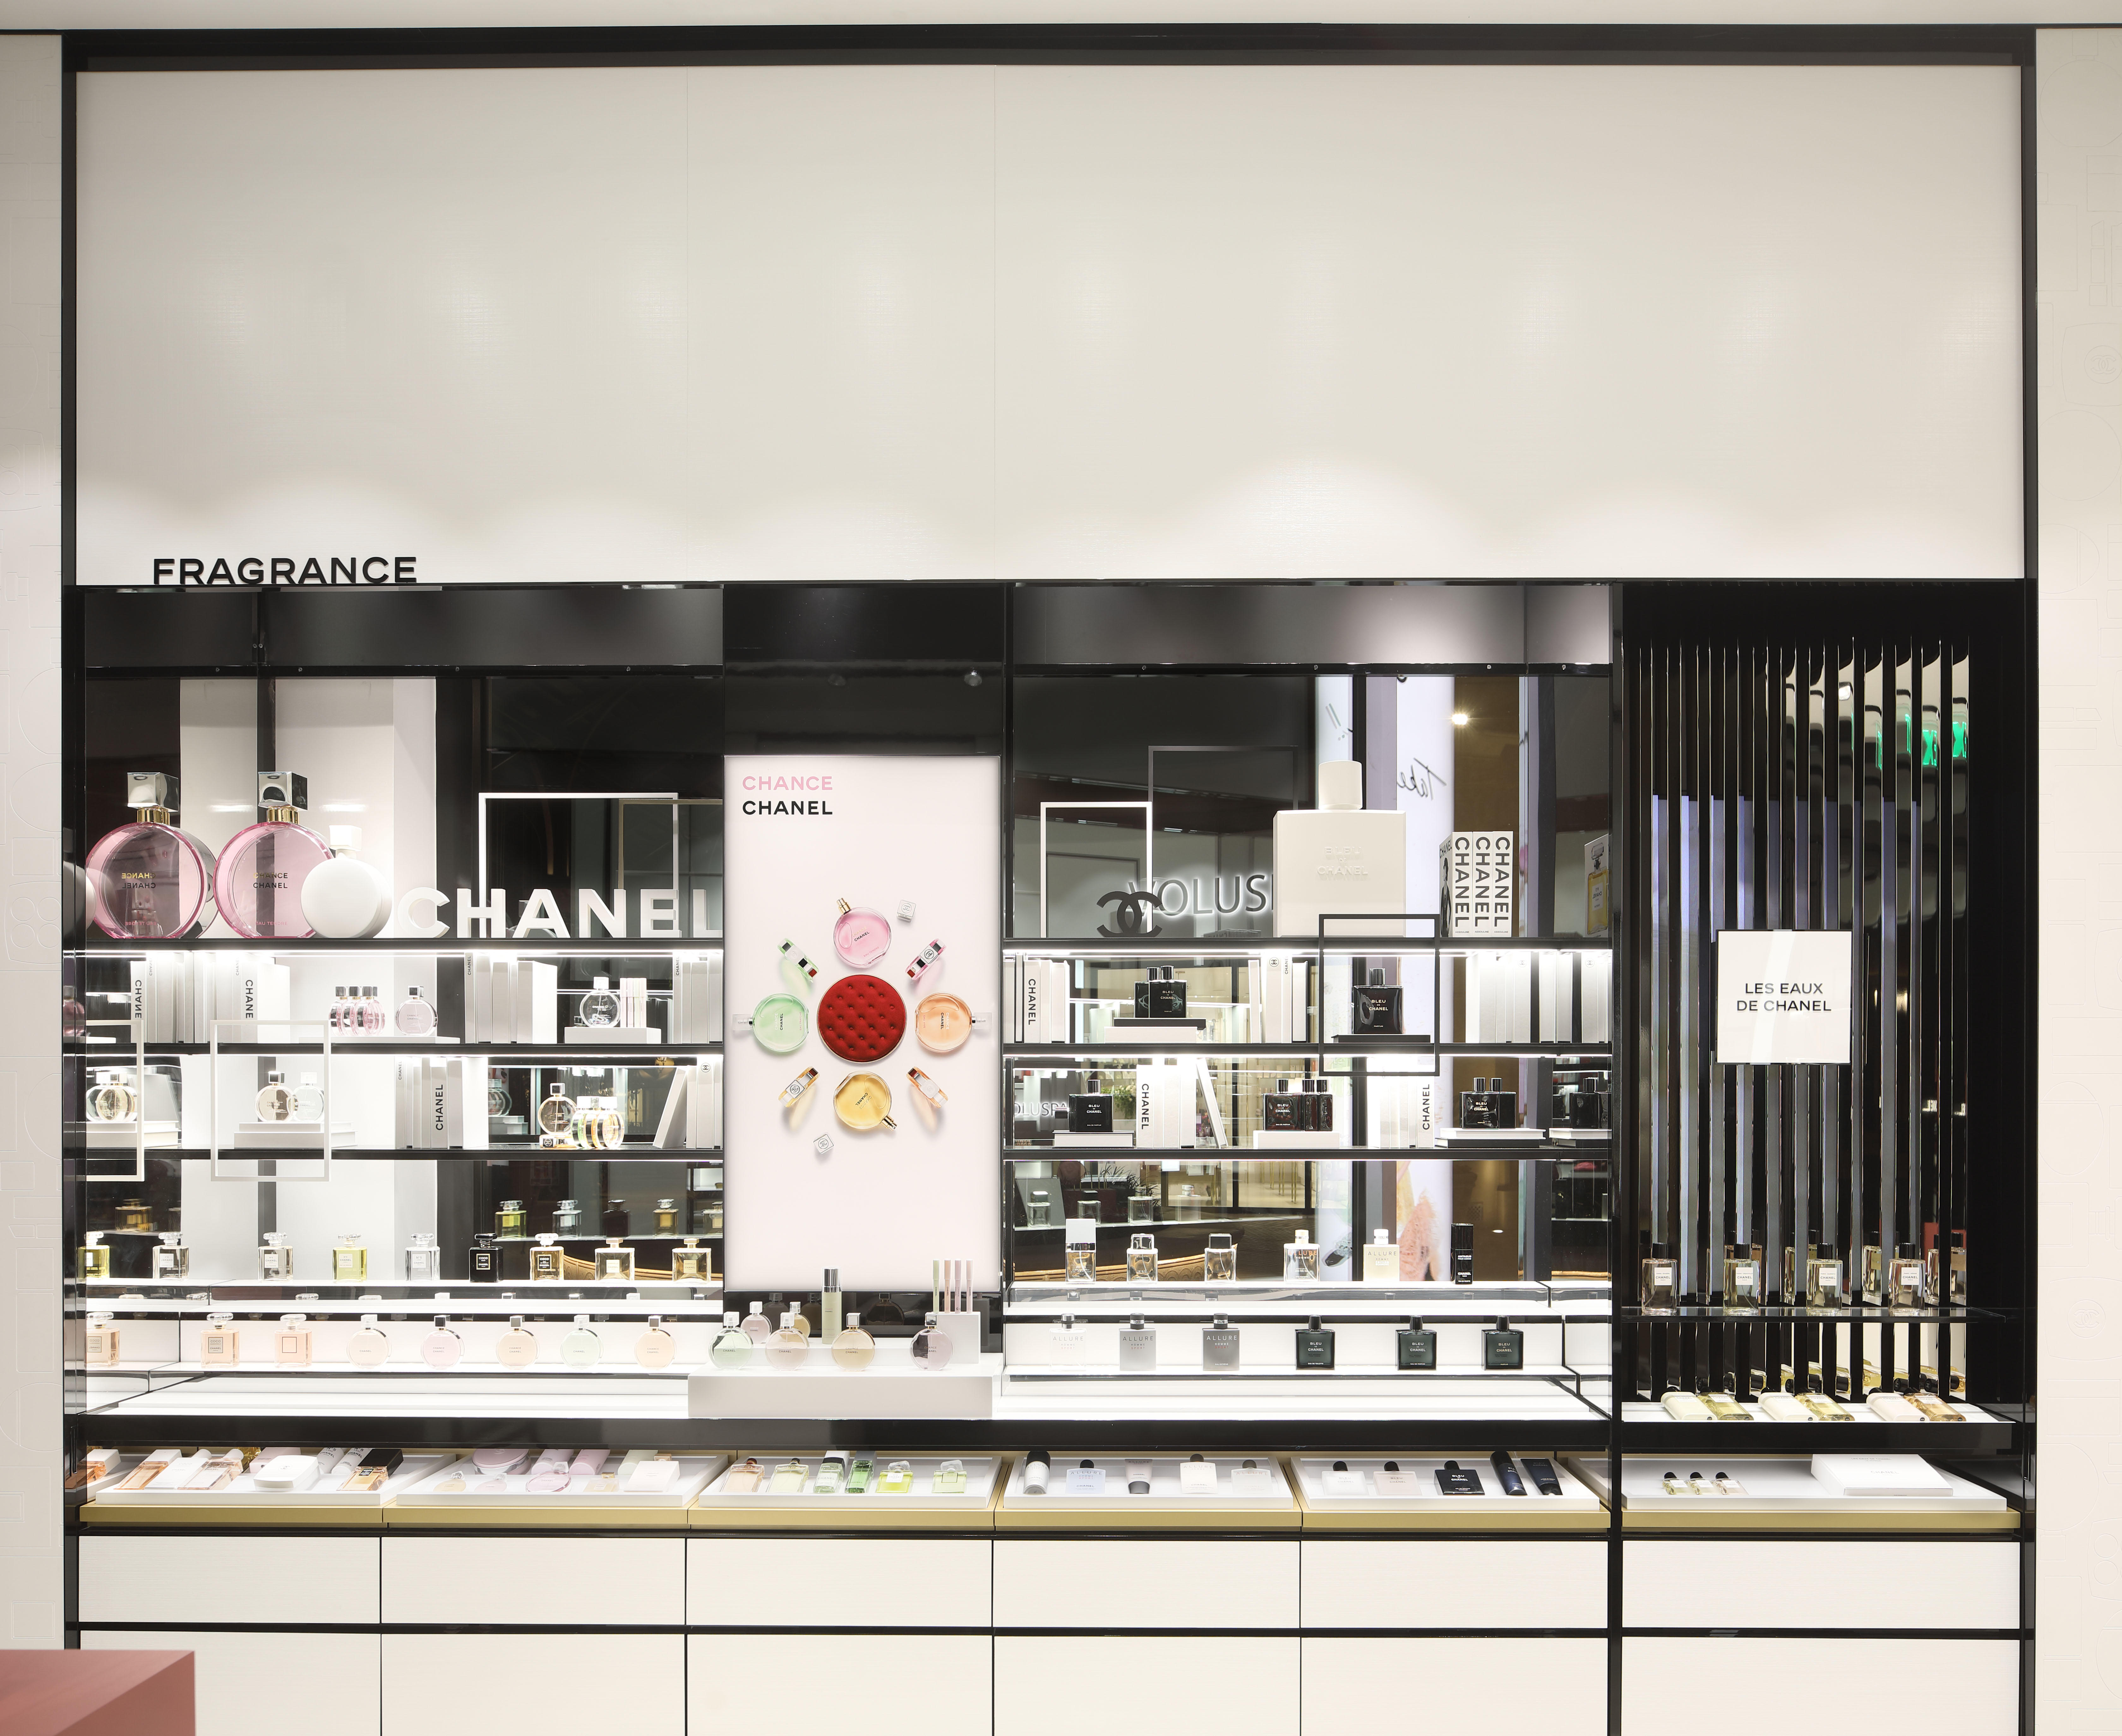 CHANEL FRAGRANCE AND BEAUTY BOUTIQUE, 815 Newport Center Drive